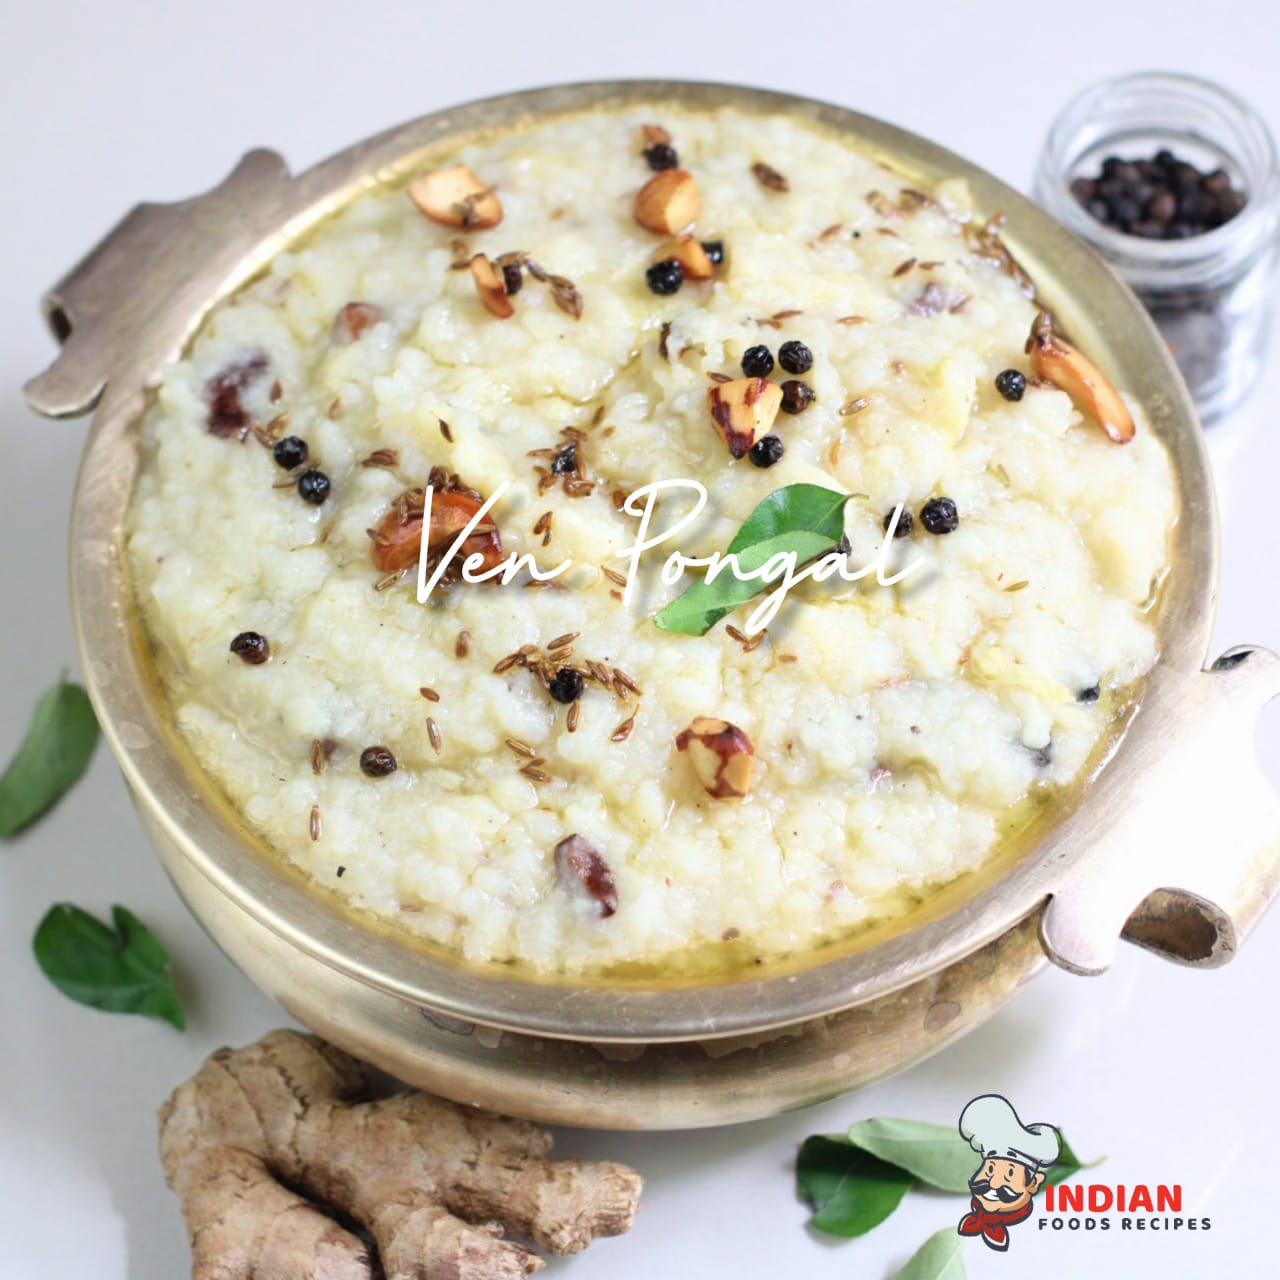 how to make ven pongal recipe